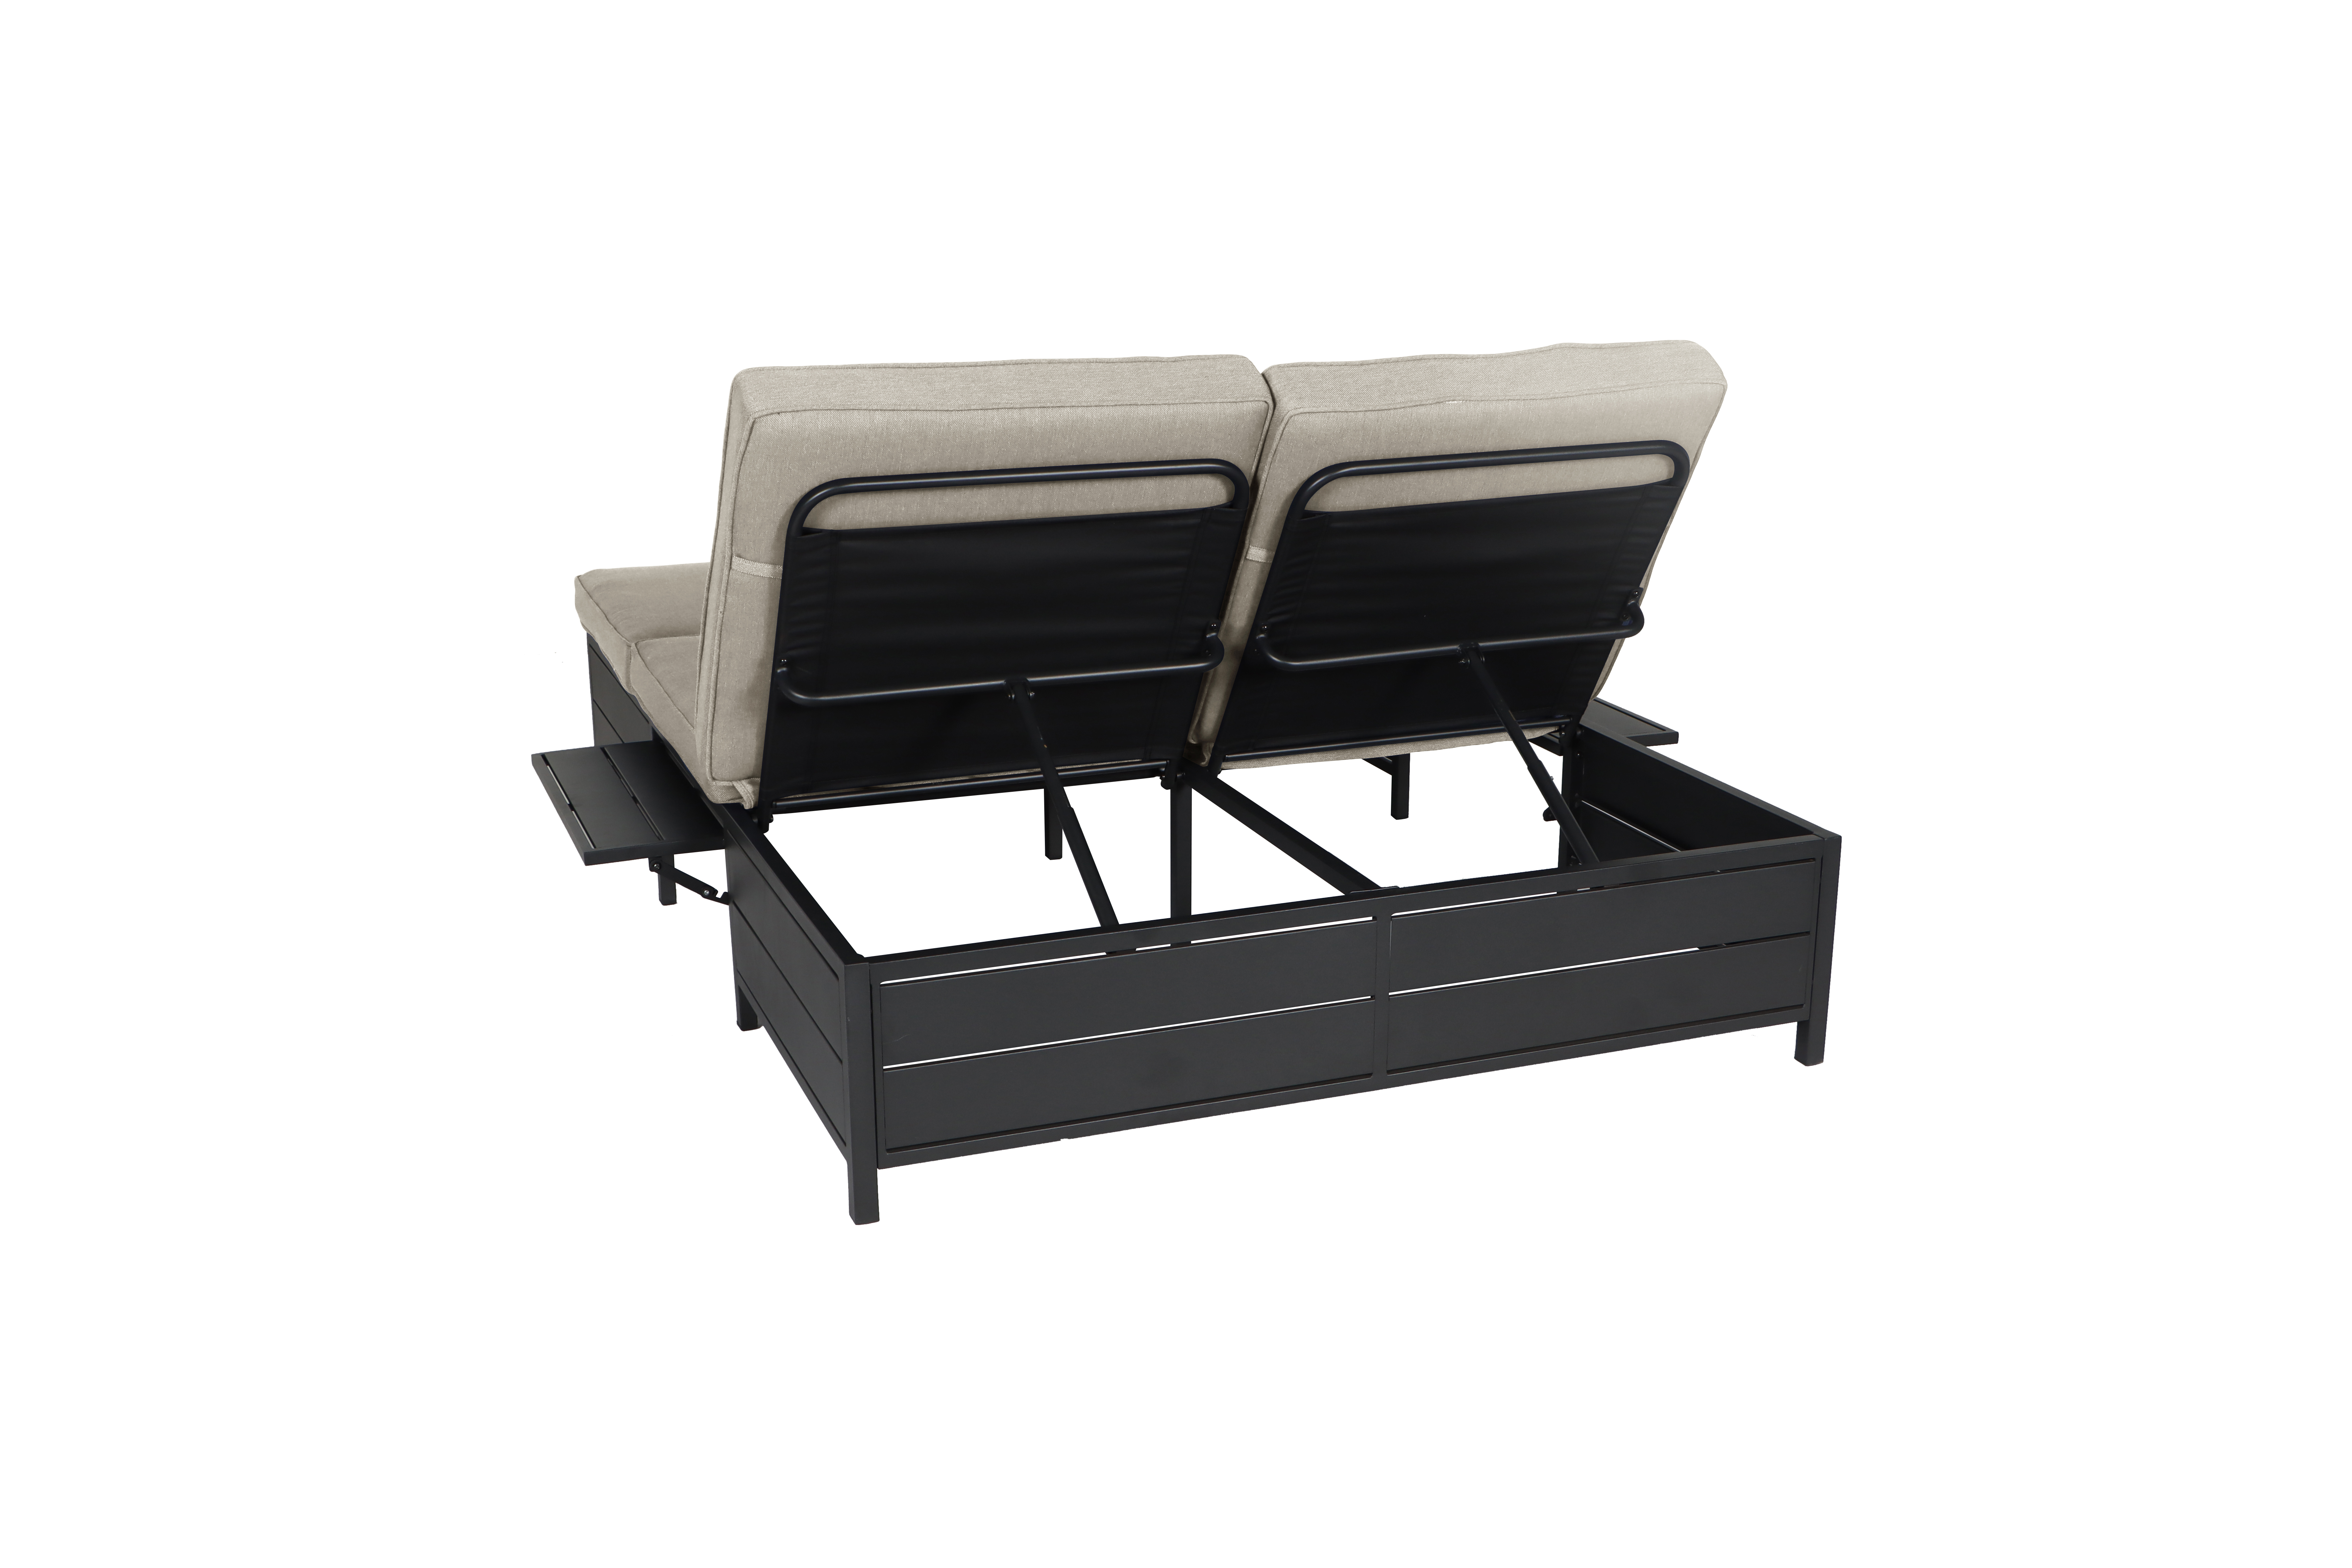 Mainstays Cushion Steel Outdoor Chaise Lounge - Tan/Black - image 4 of 5